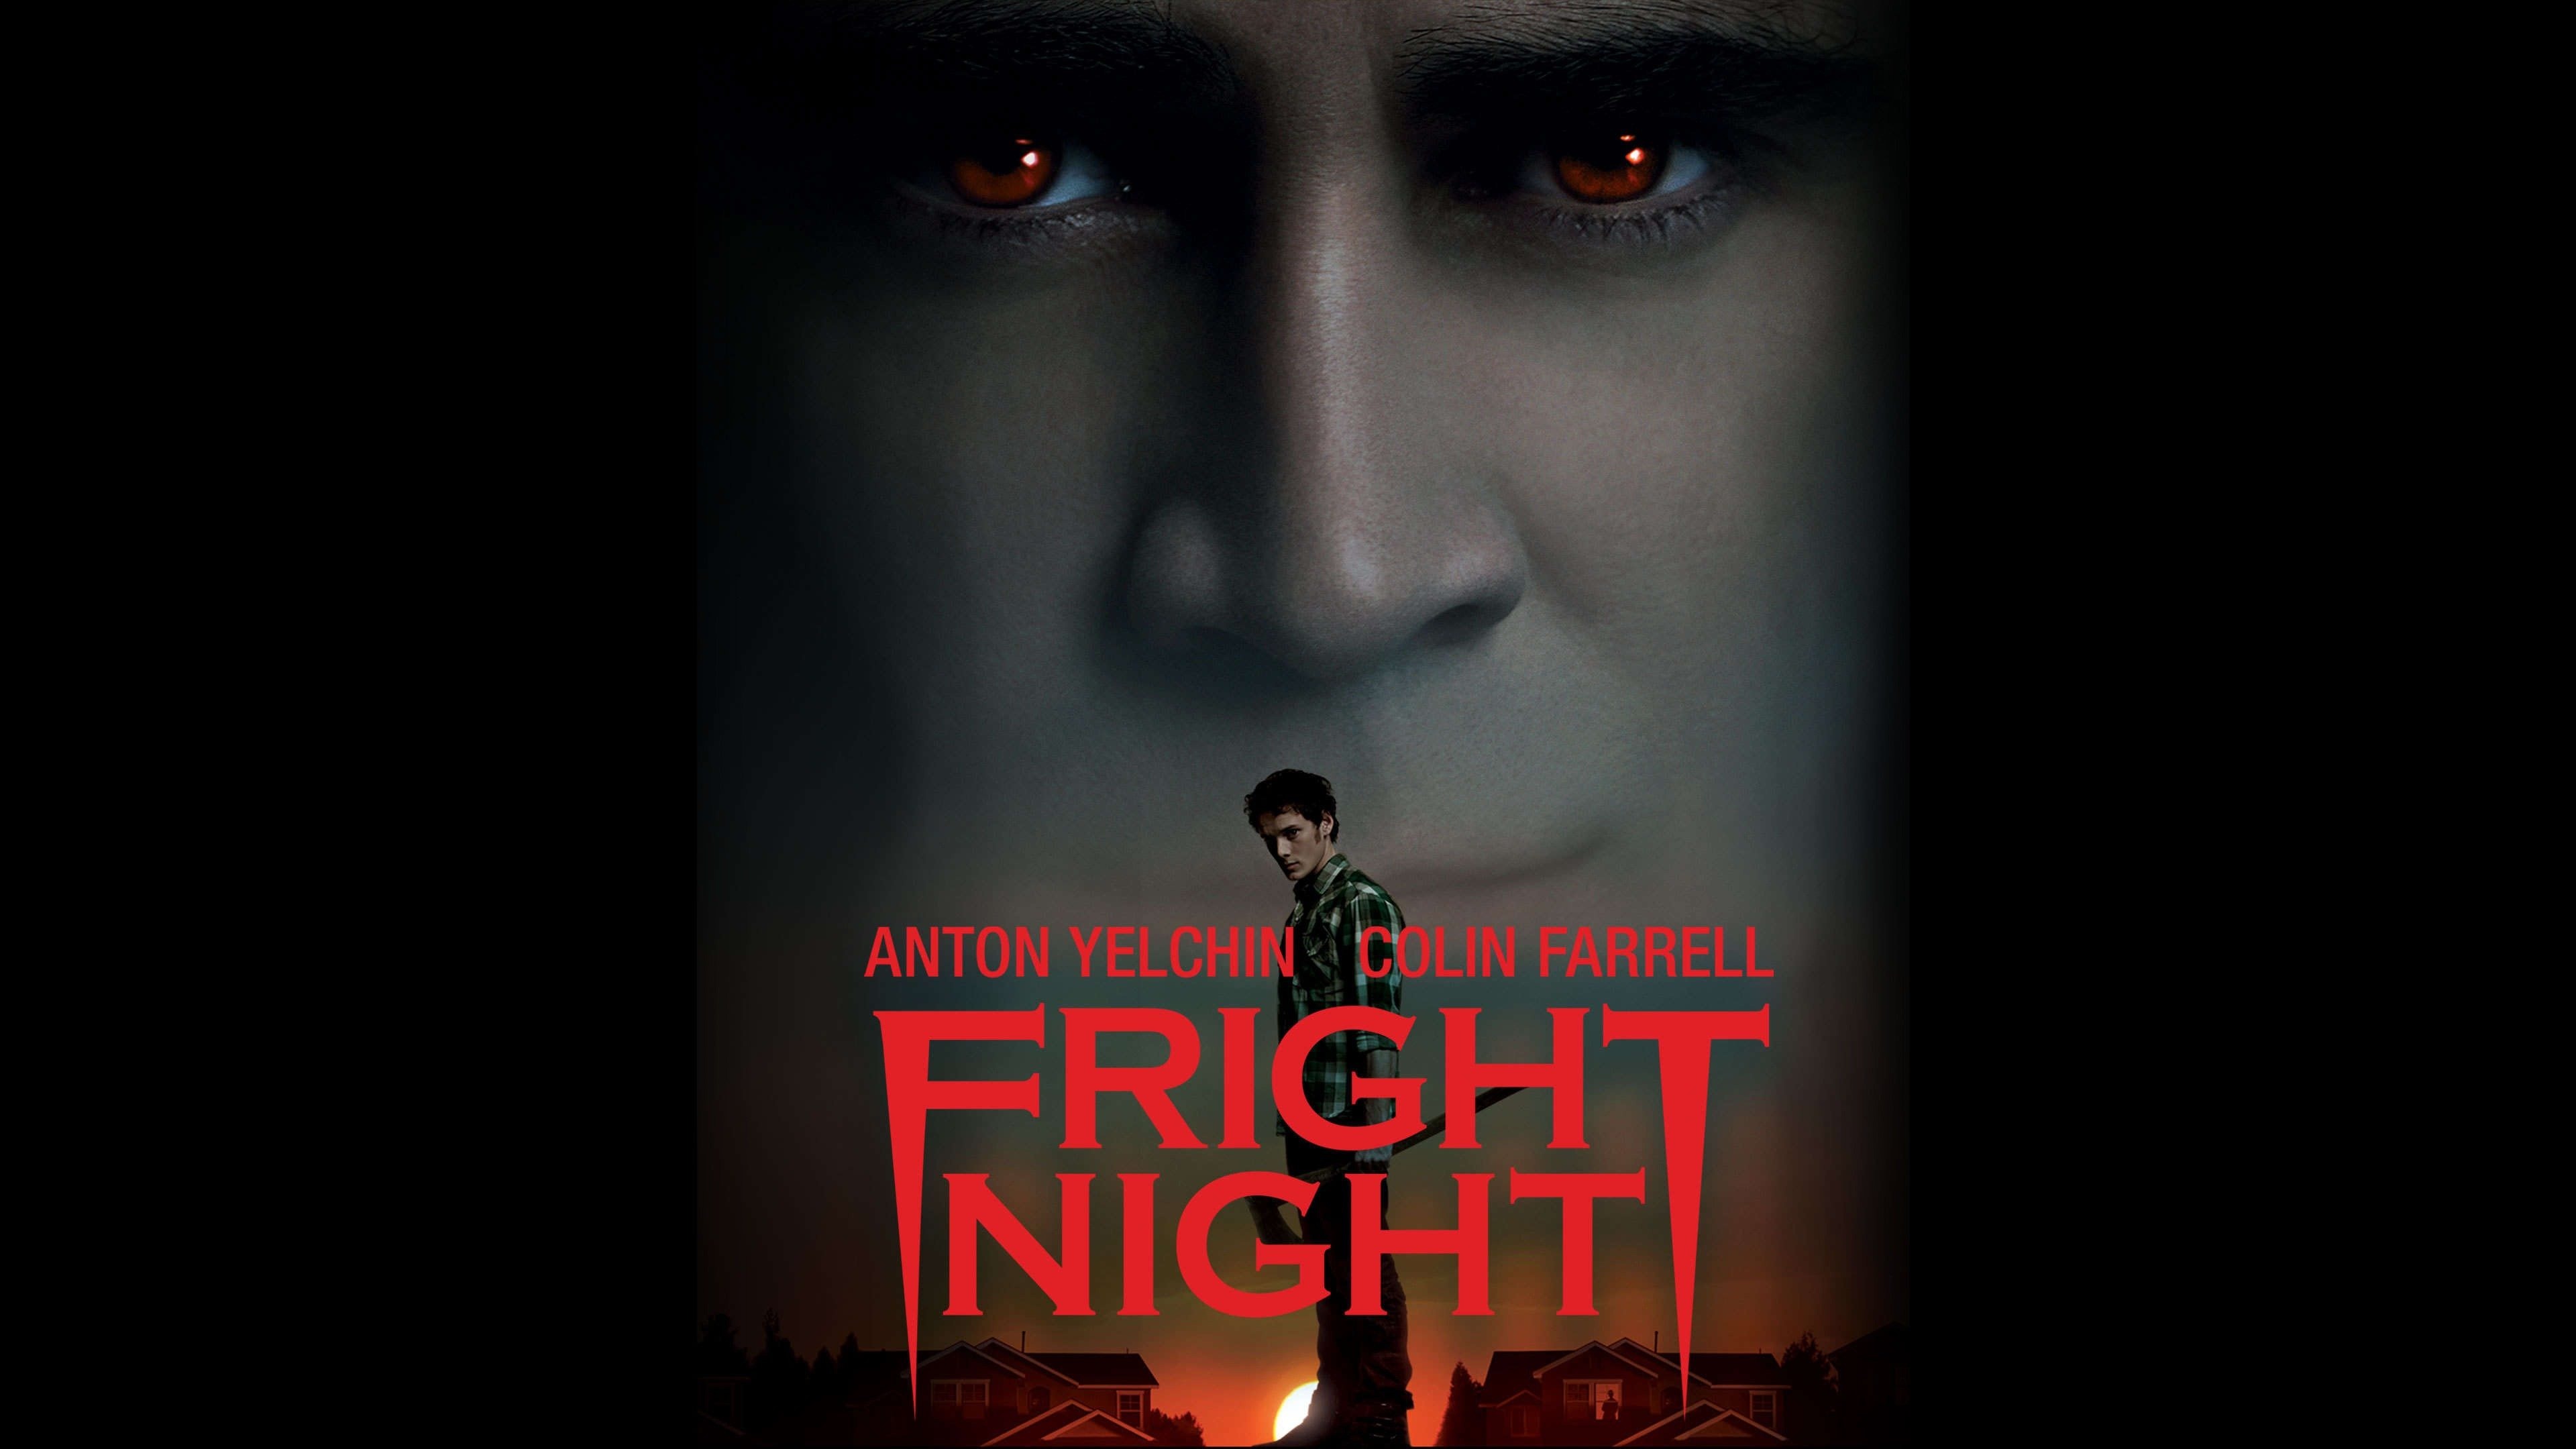 46-facts-about-the-movie-fright-night